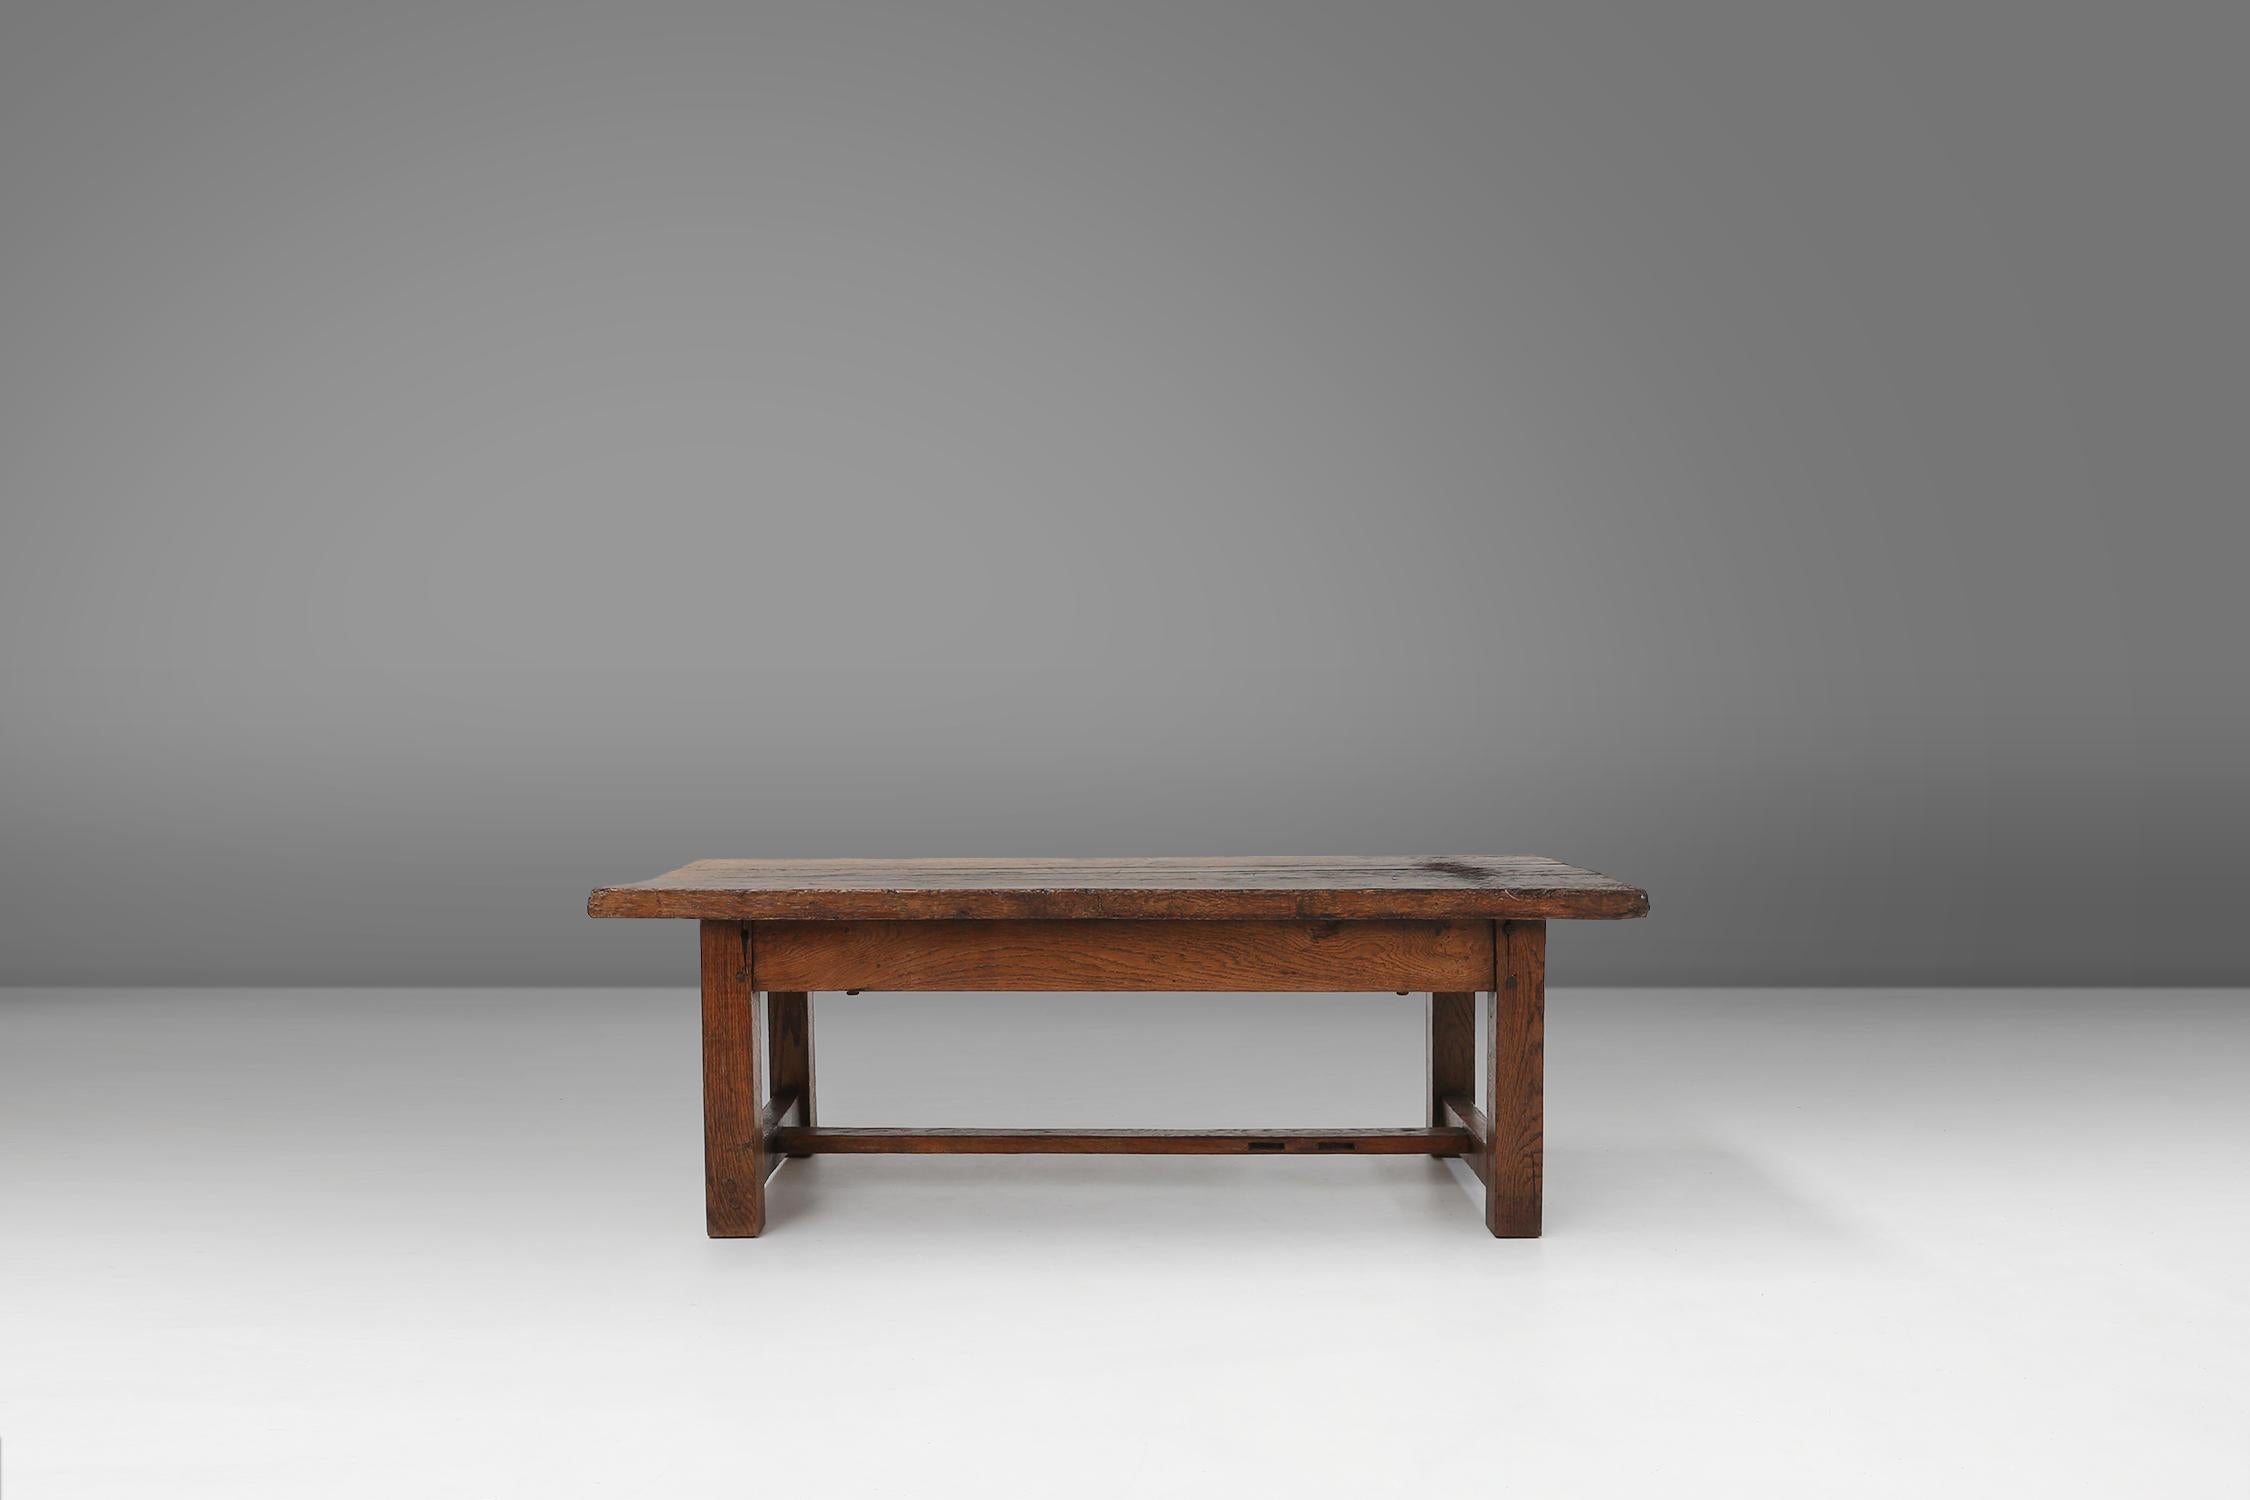 This coffee table made in Belgium 1890 has a lot of patina on the wood, attesting to its long history and character. The wood has a very rustic and wabi sabi look, meaning it appreciates the beauty of the imperfect and impermanent.

It has a